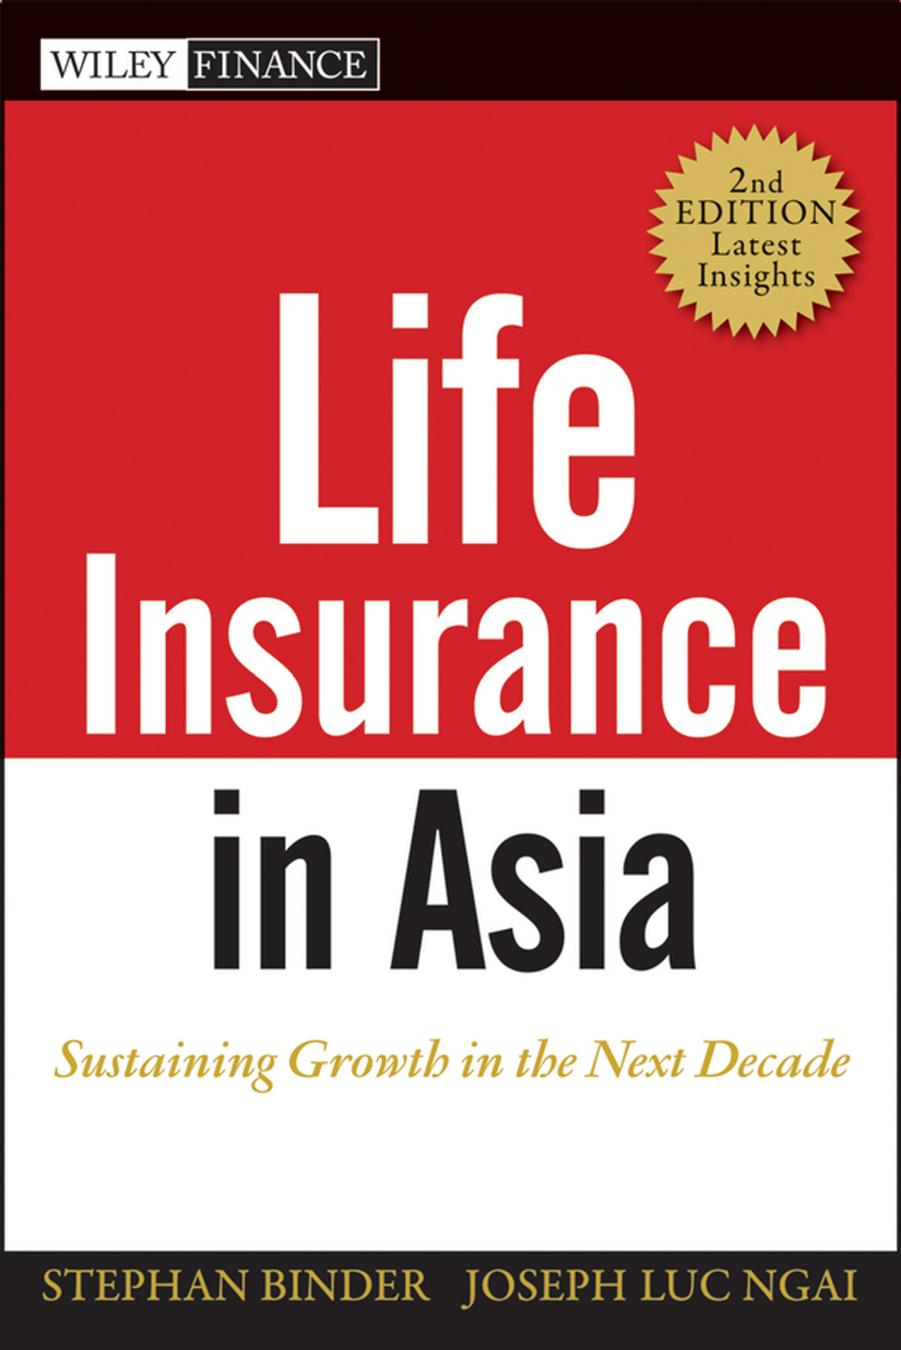 Life Insurance in Asia, Second Edition: Sustaining Growth in the Next Decade